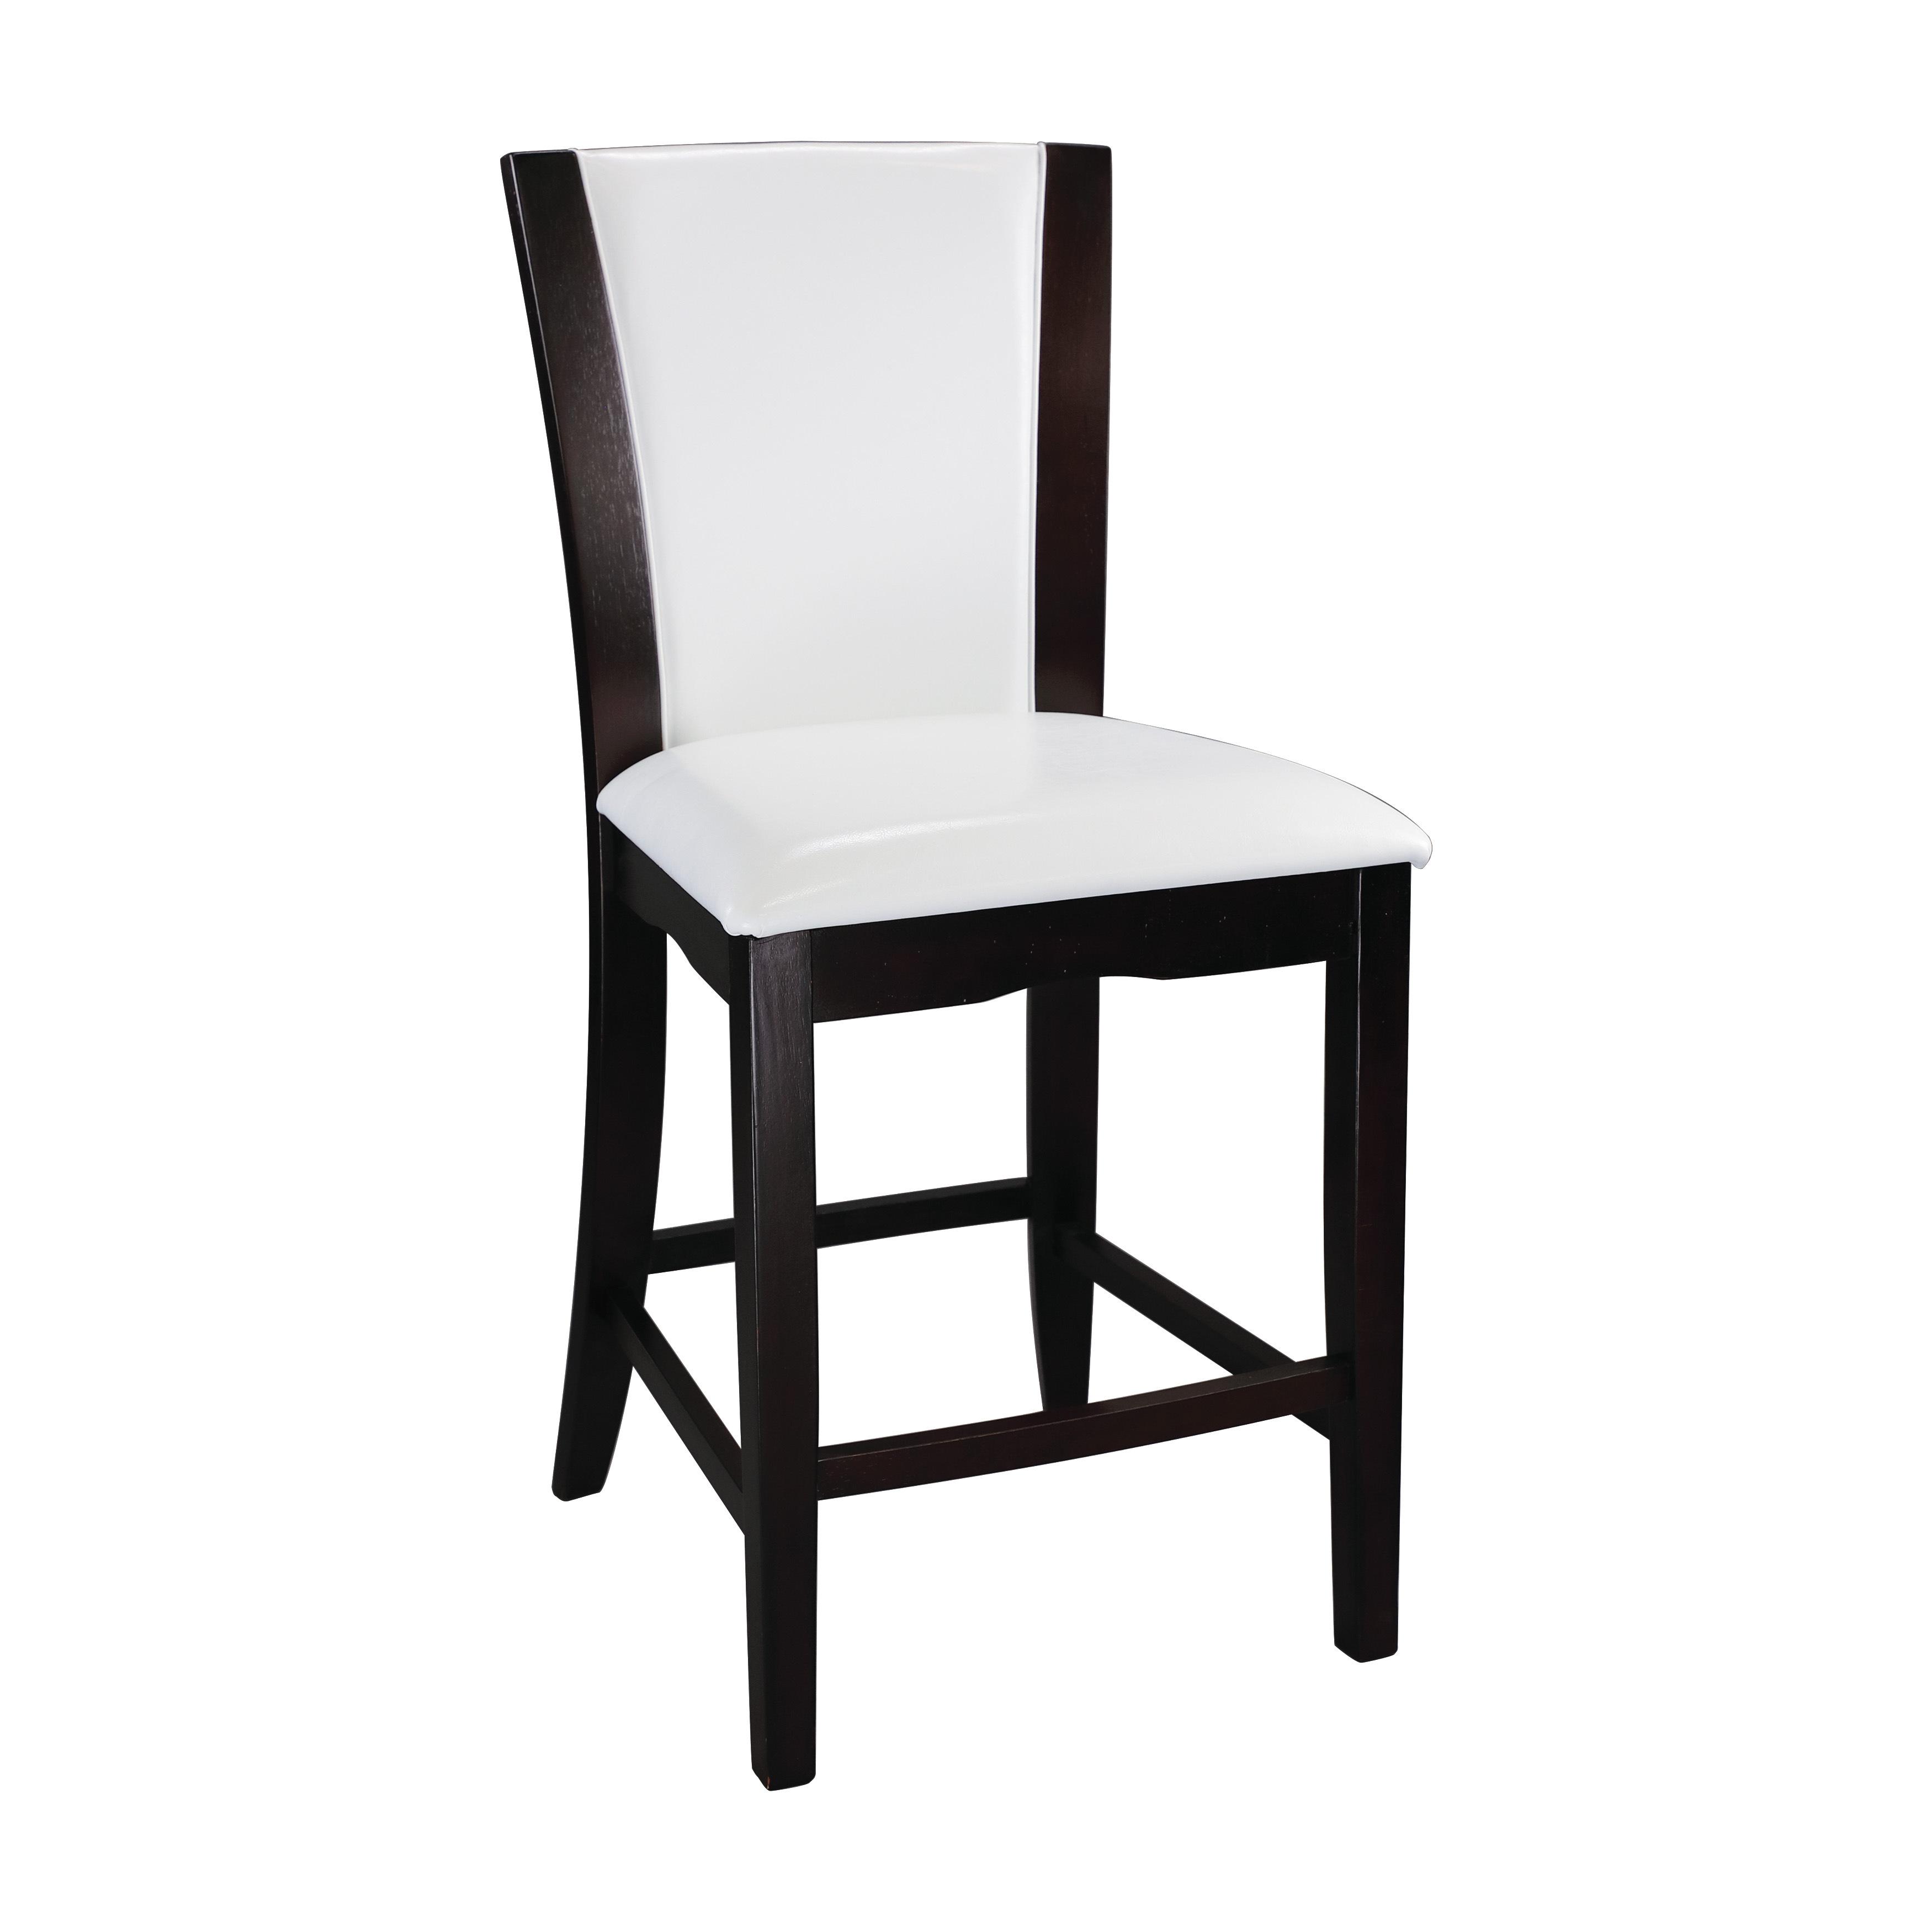 

    
Contemporary Espresso & White Wood Counter Height Chair Set 2pcs Homelegance 710-24W Daisy
